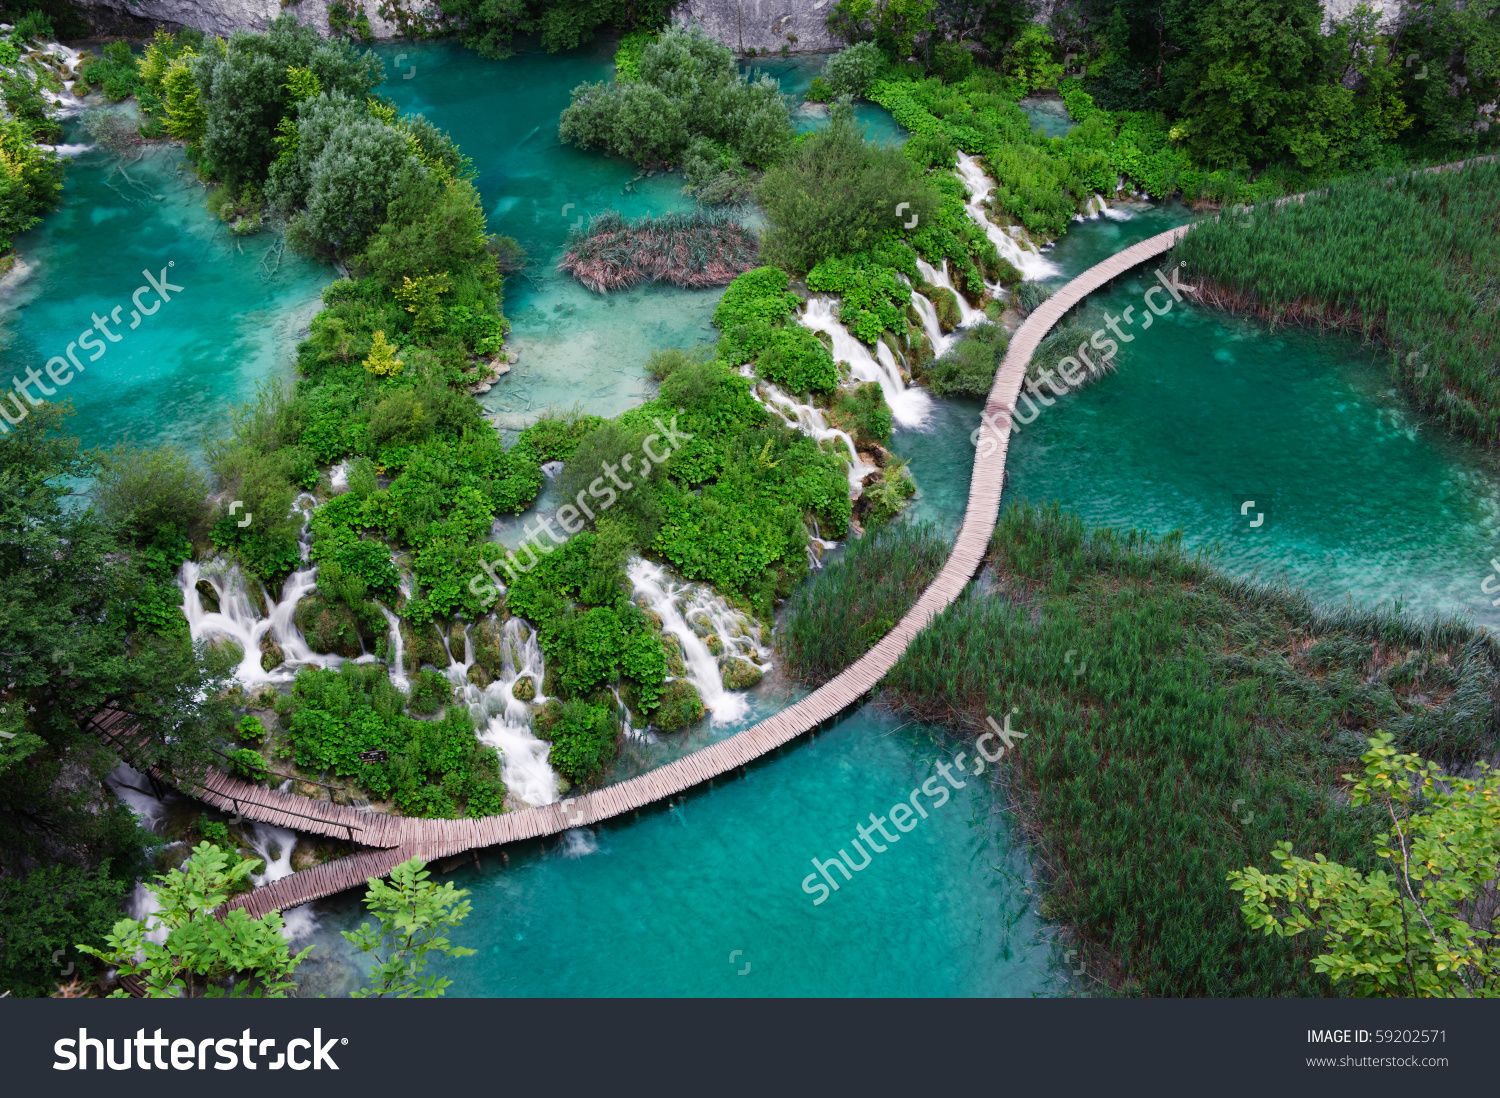 Plitvice National Park clipart #18, Download drawings